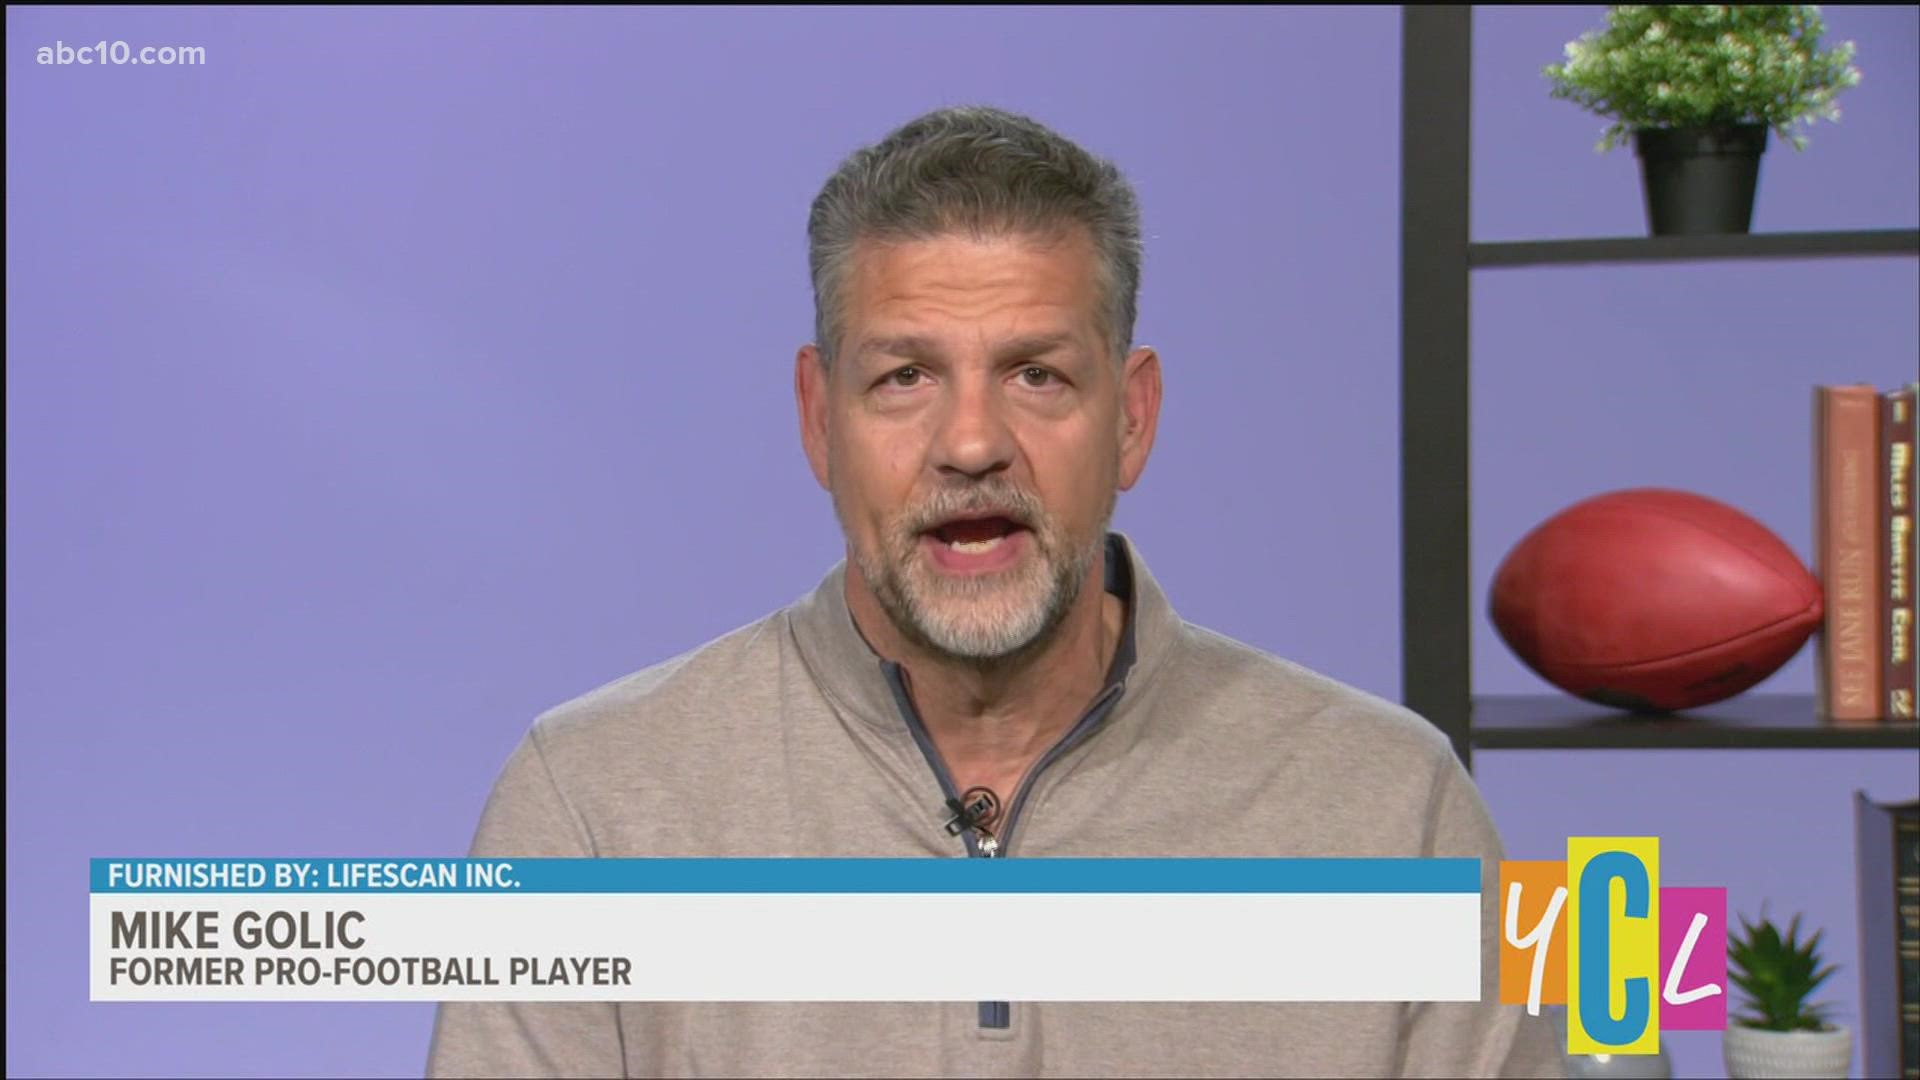 Former Pro-Football Player Mike Golic Tackles Diabetes